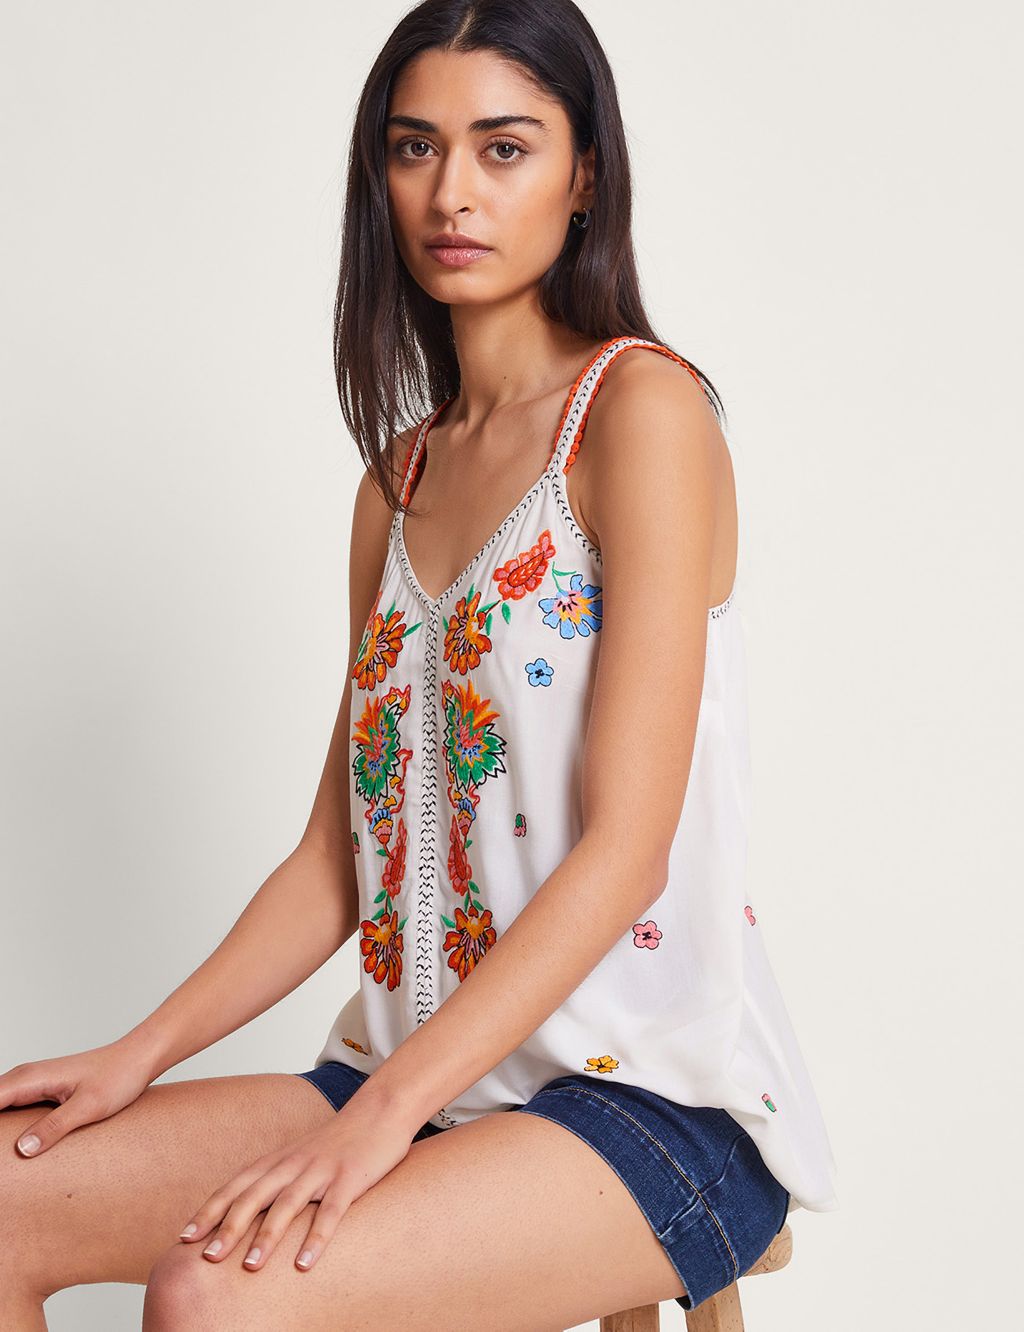 Floral Embroidered Cami Top